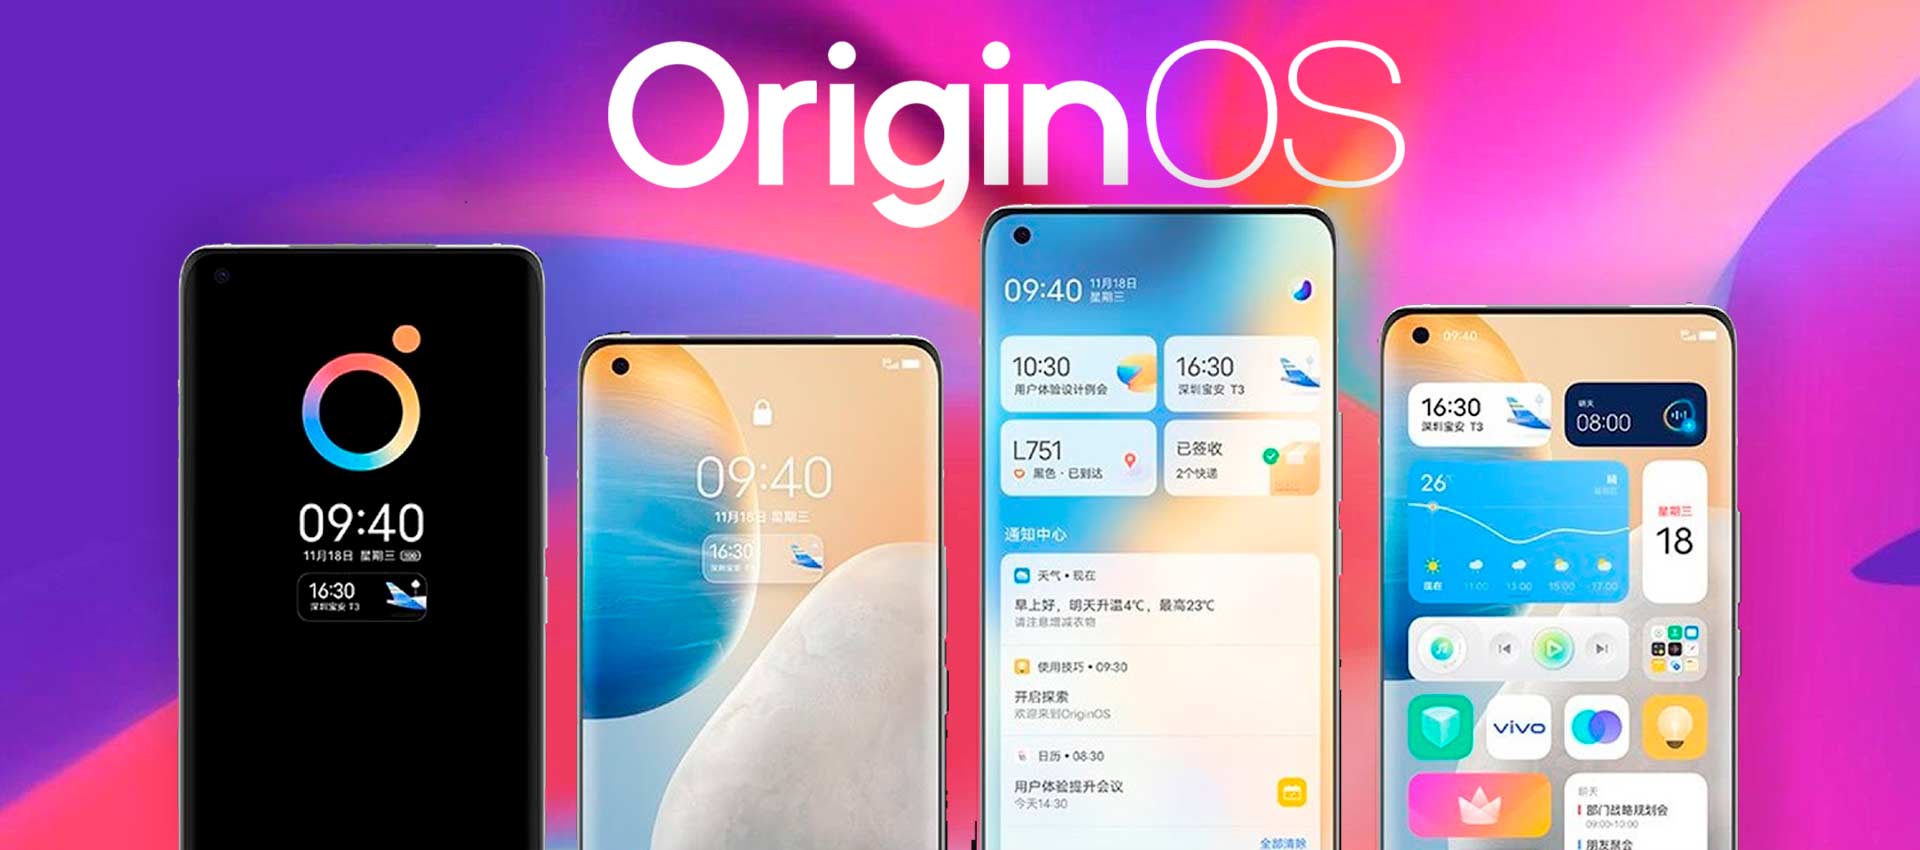 Vivo Announces New Android-Based Operating System Origin OS